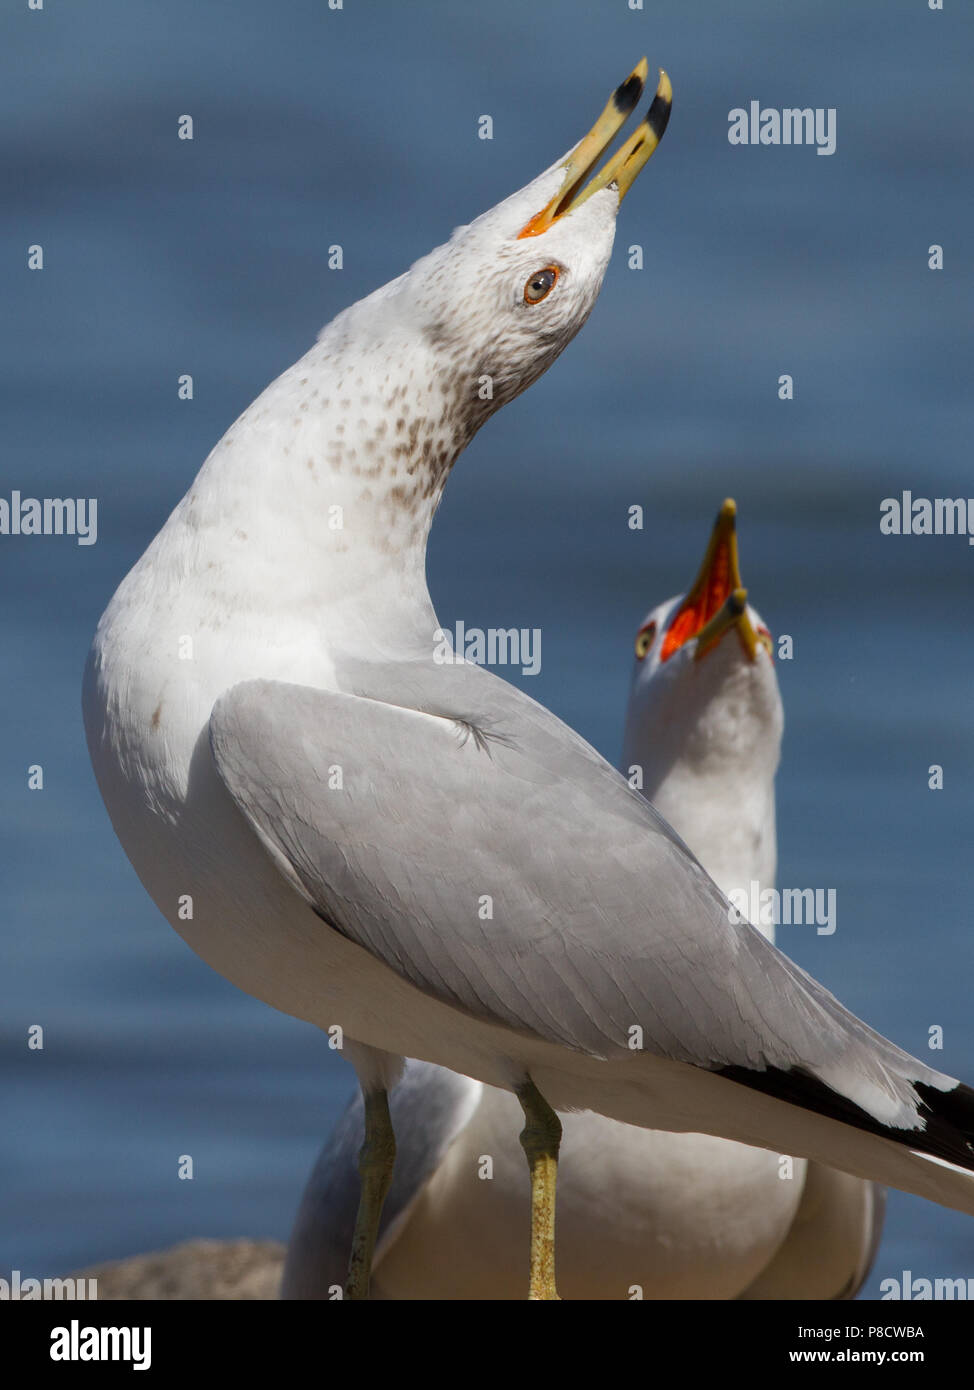 A ring-billed gull calling and posturing. Stock Photo